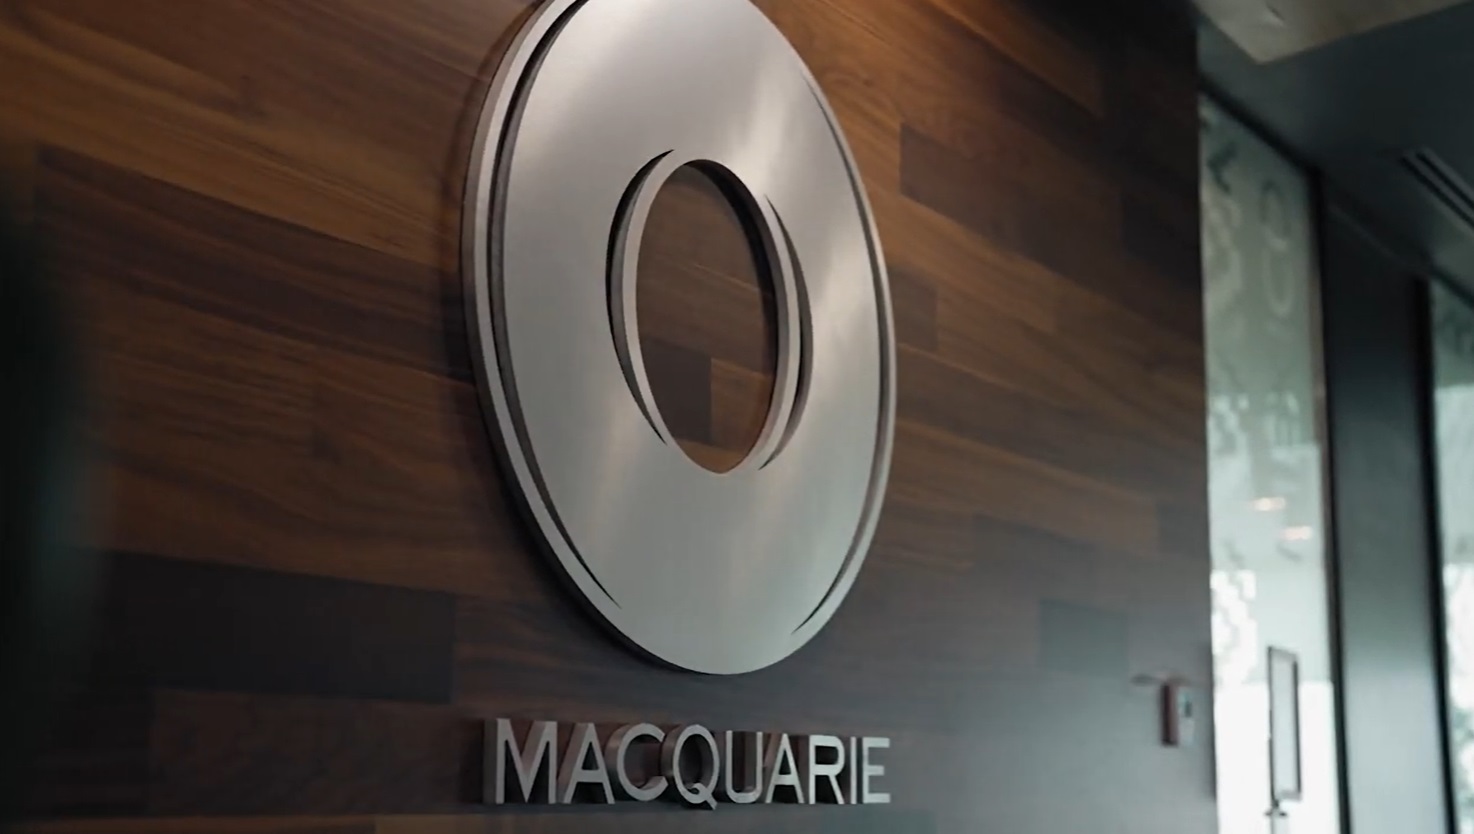 Macquarie Acquires 50% Stake in Enel’s Greek Renewables Business for €250 Million